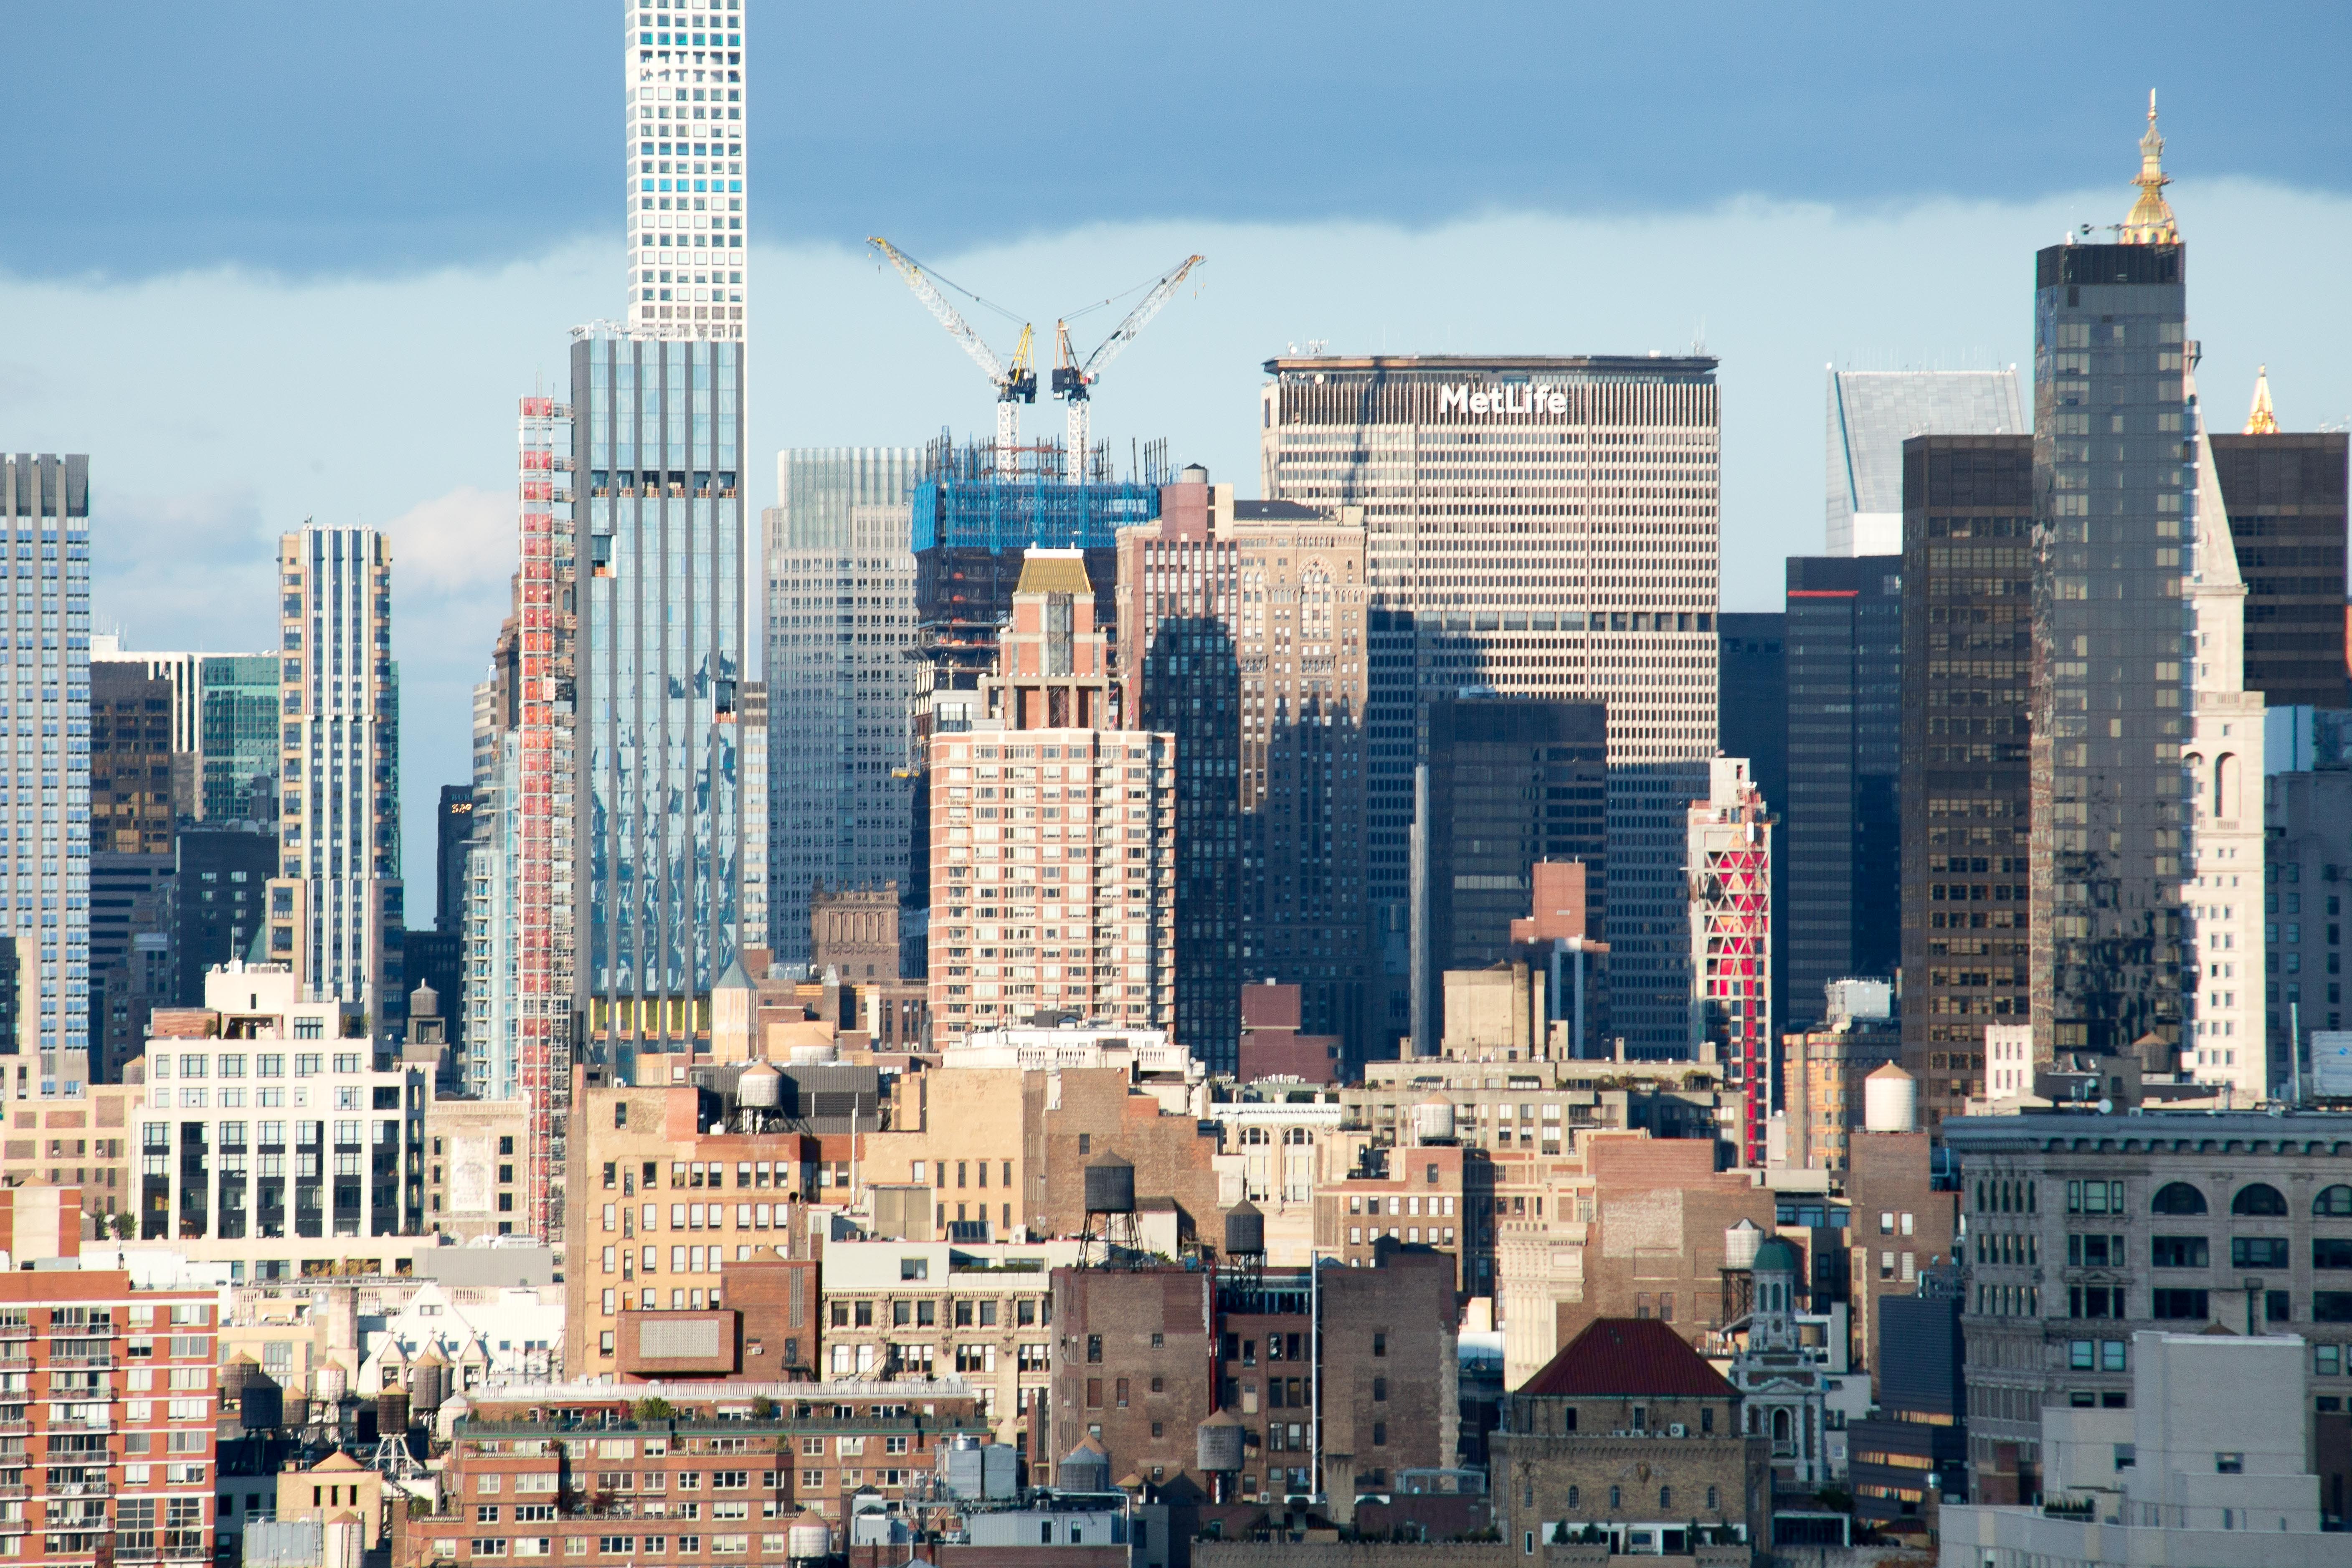 One Vanderbilt as seen from 565 Broome Street, image by Andrew Campbell Nelson